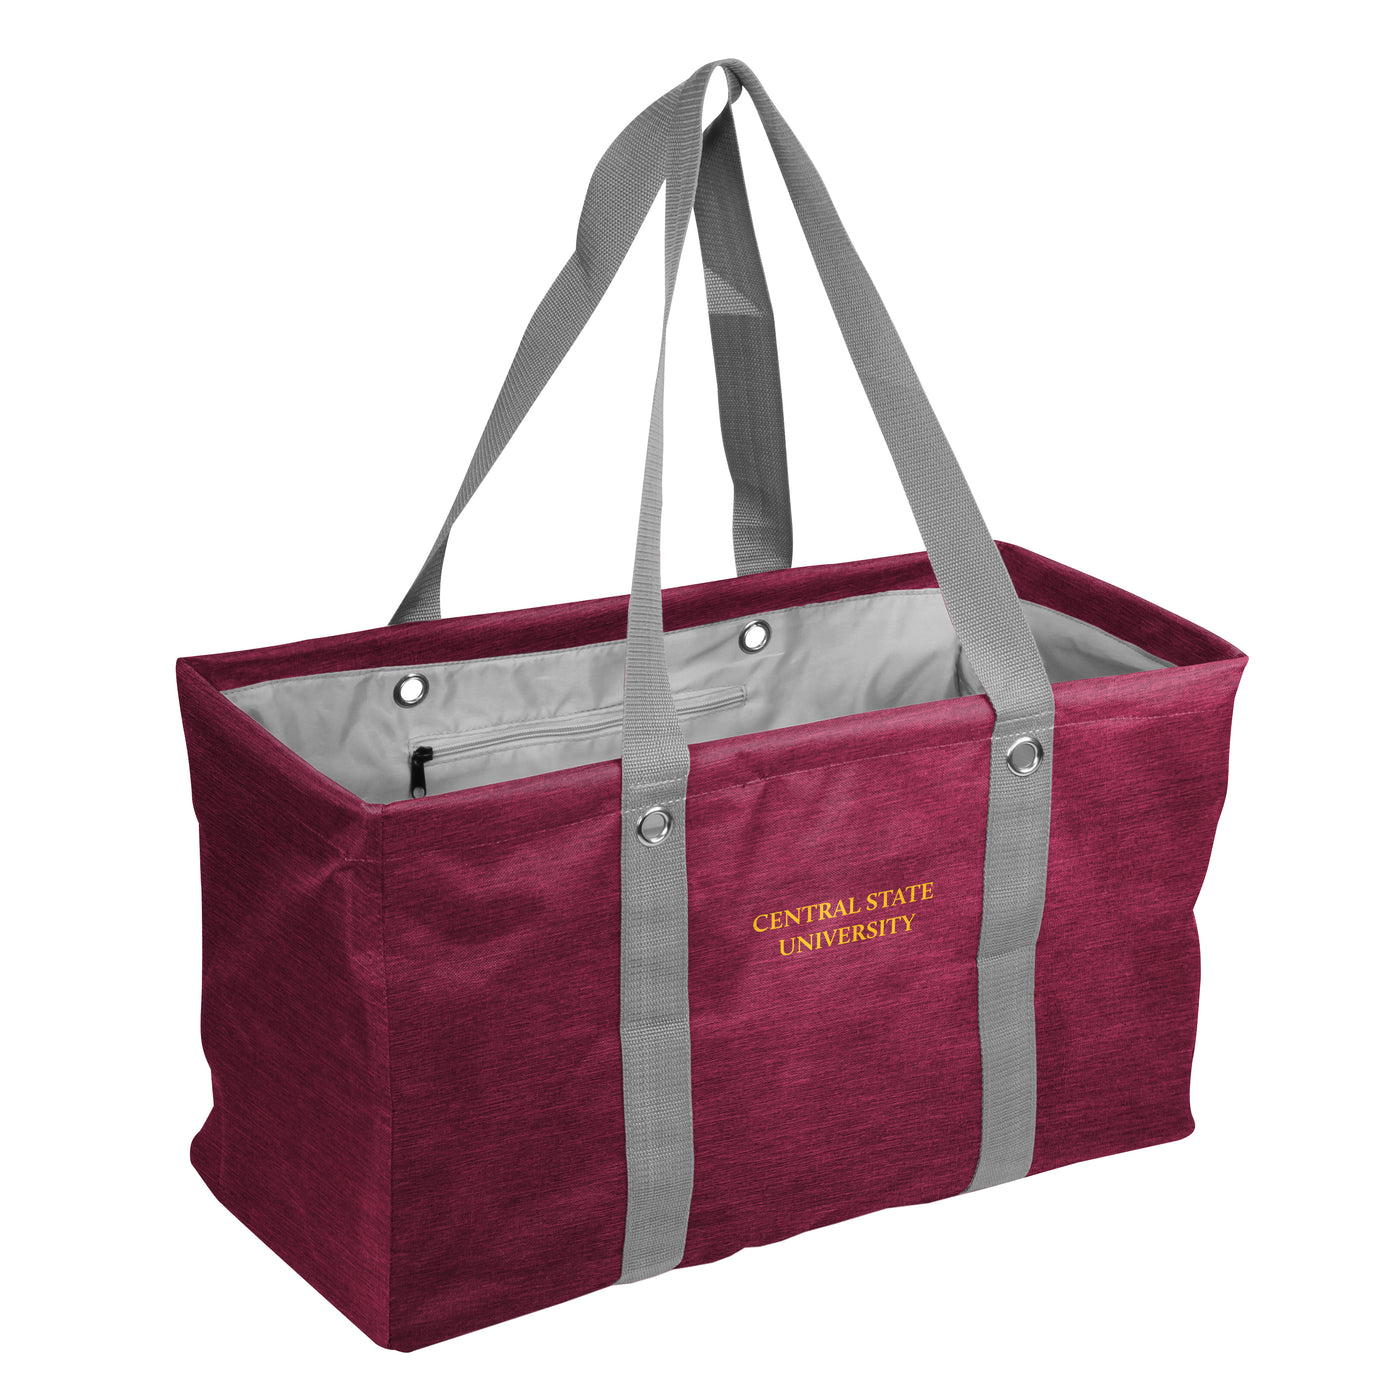 Central State University Picnic Caddy